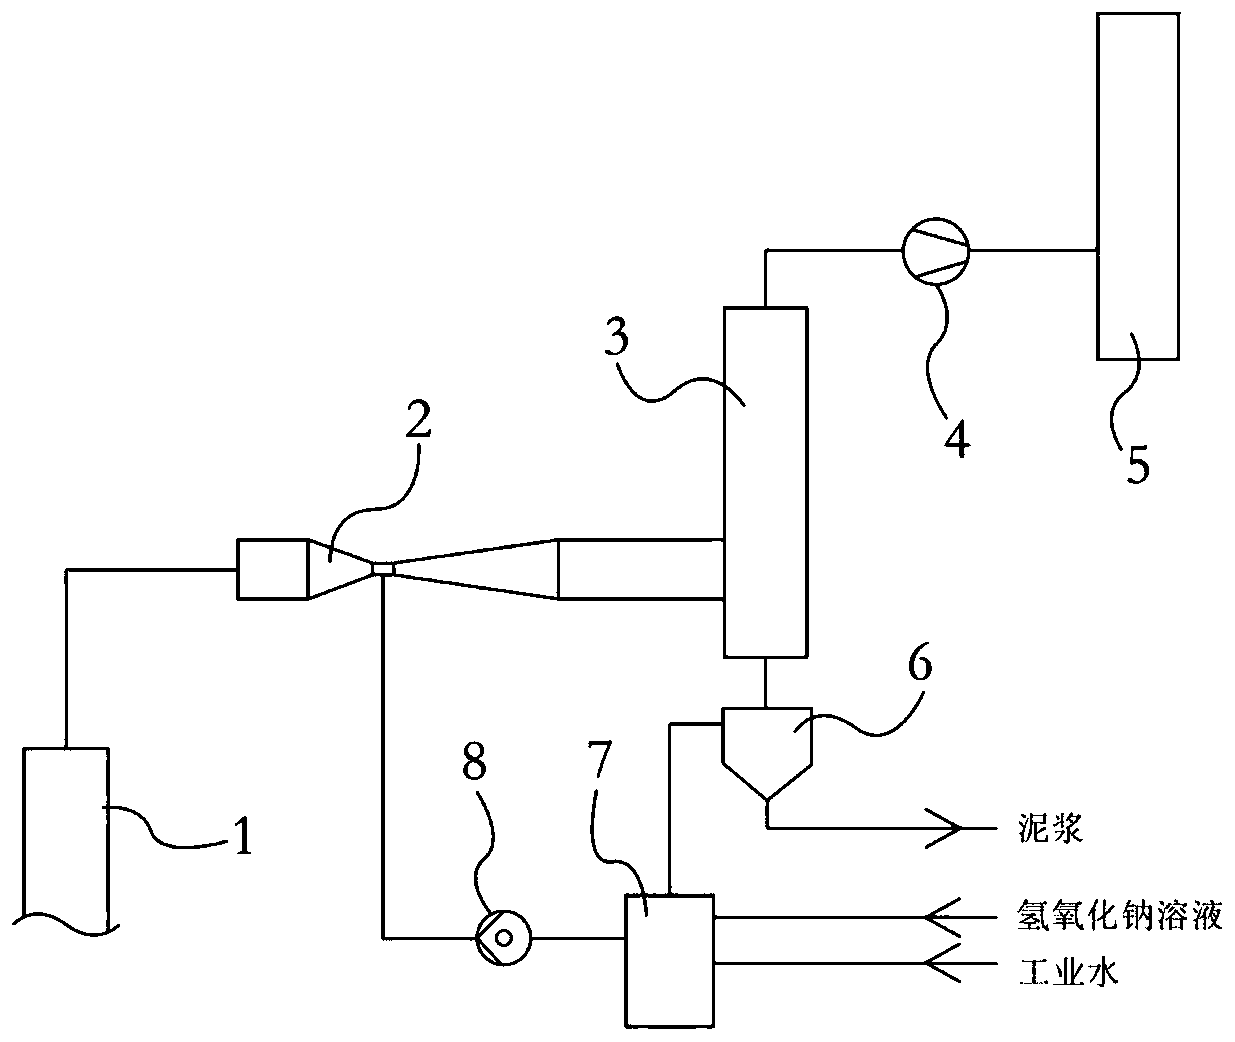 Secondary combustion chamber emergency discharging chimney tail gas purification system